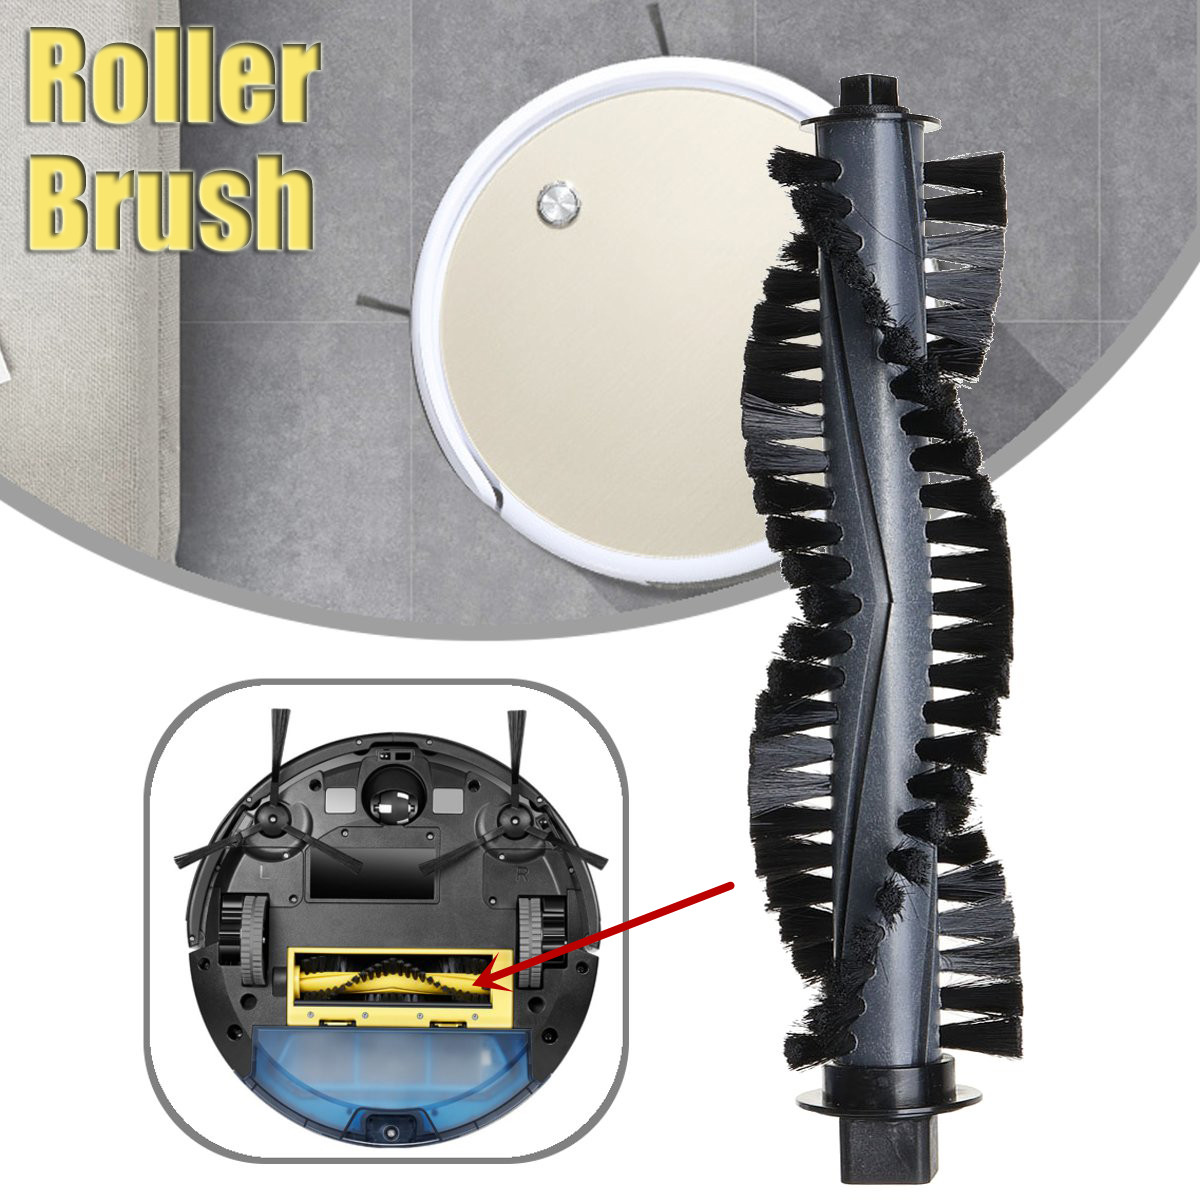 1Pcs-Main-Roller-Brush-Replacement-Part-for-ILIFE-A4S-Robot-Vacuum-Cleaner-1390782-2